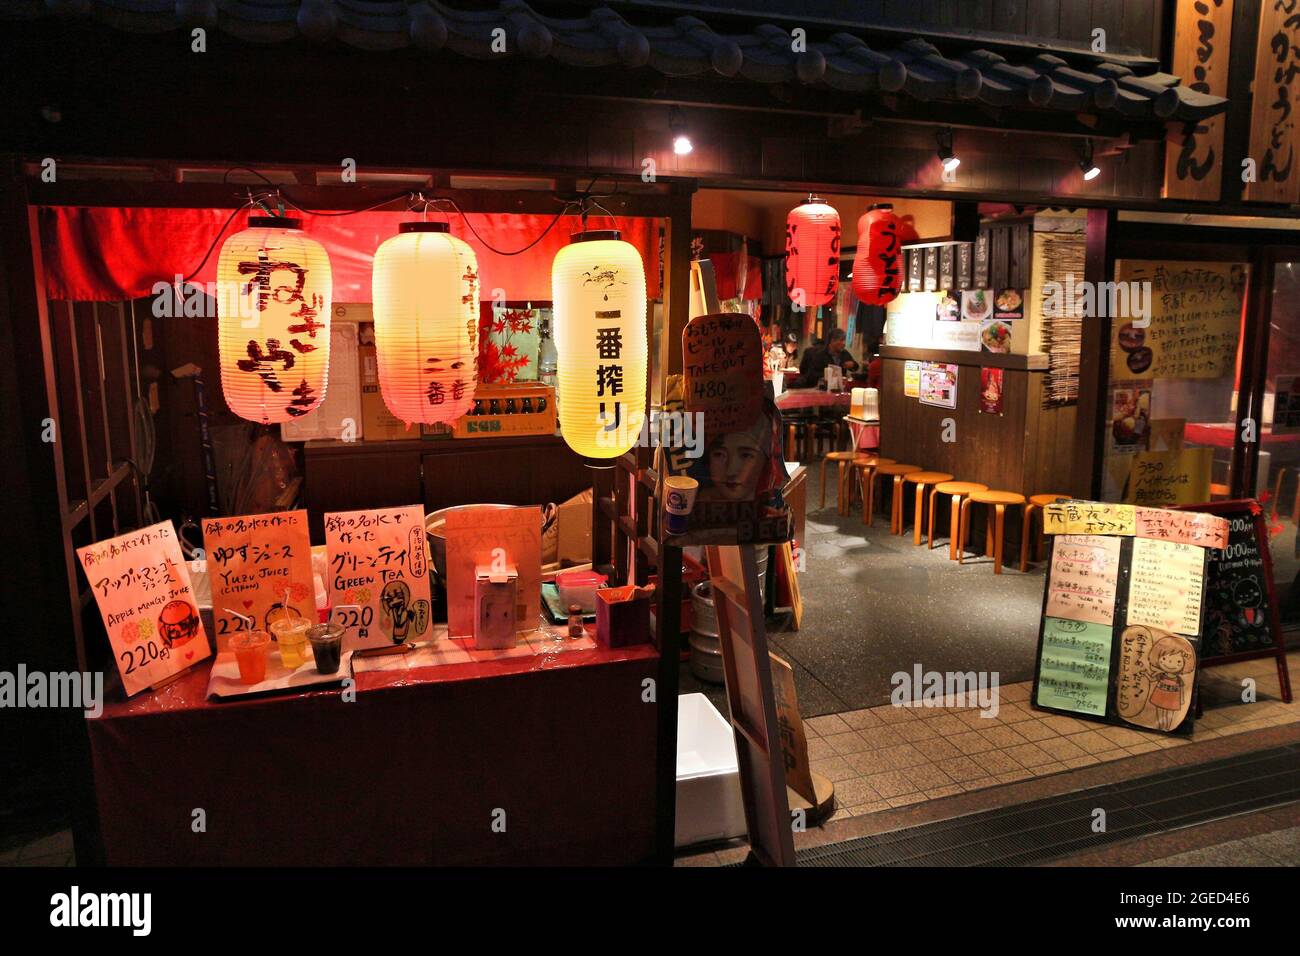 KYOTO, JAPAN - NOVEMBER 27, 2016: Traditional local Japanese restaurant in Kyoto, Japan. Japanese restaurants are typically decorated with chochin lan Stock Photo